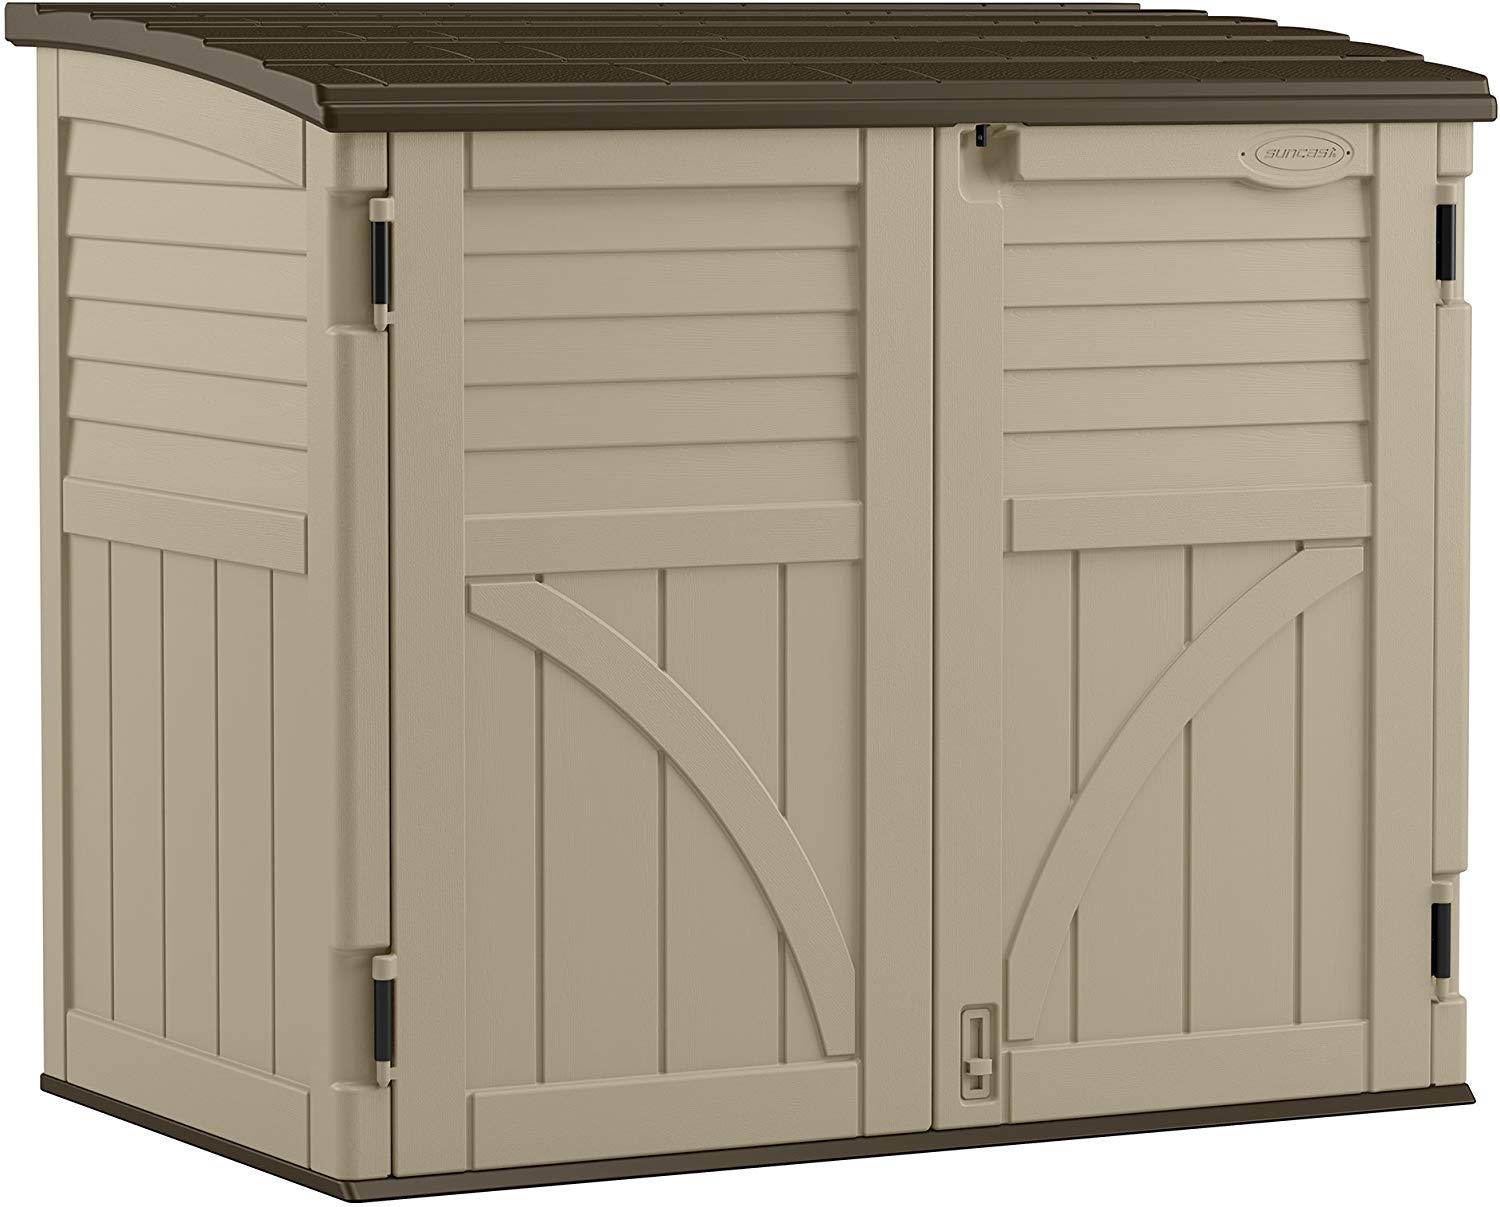 Review of Suncast BMS3400 34 cu. ft. Horizontal Shed